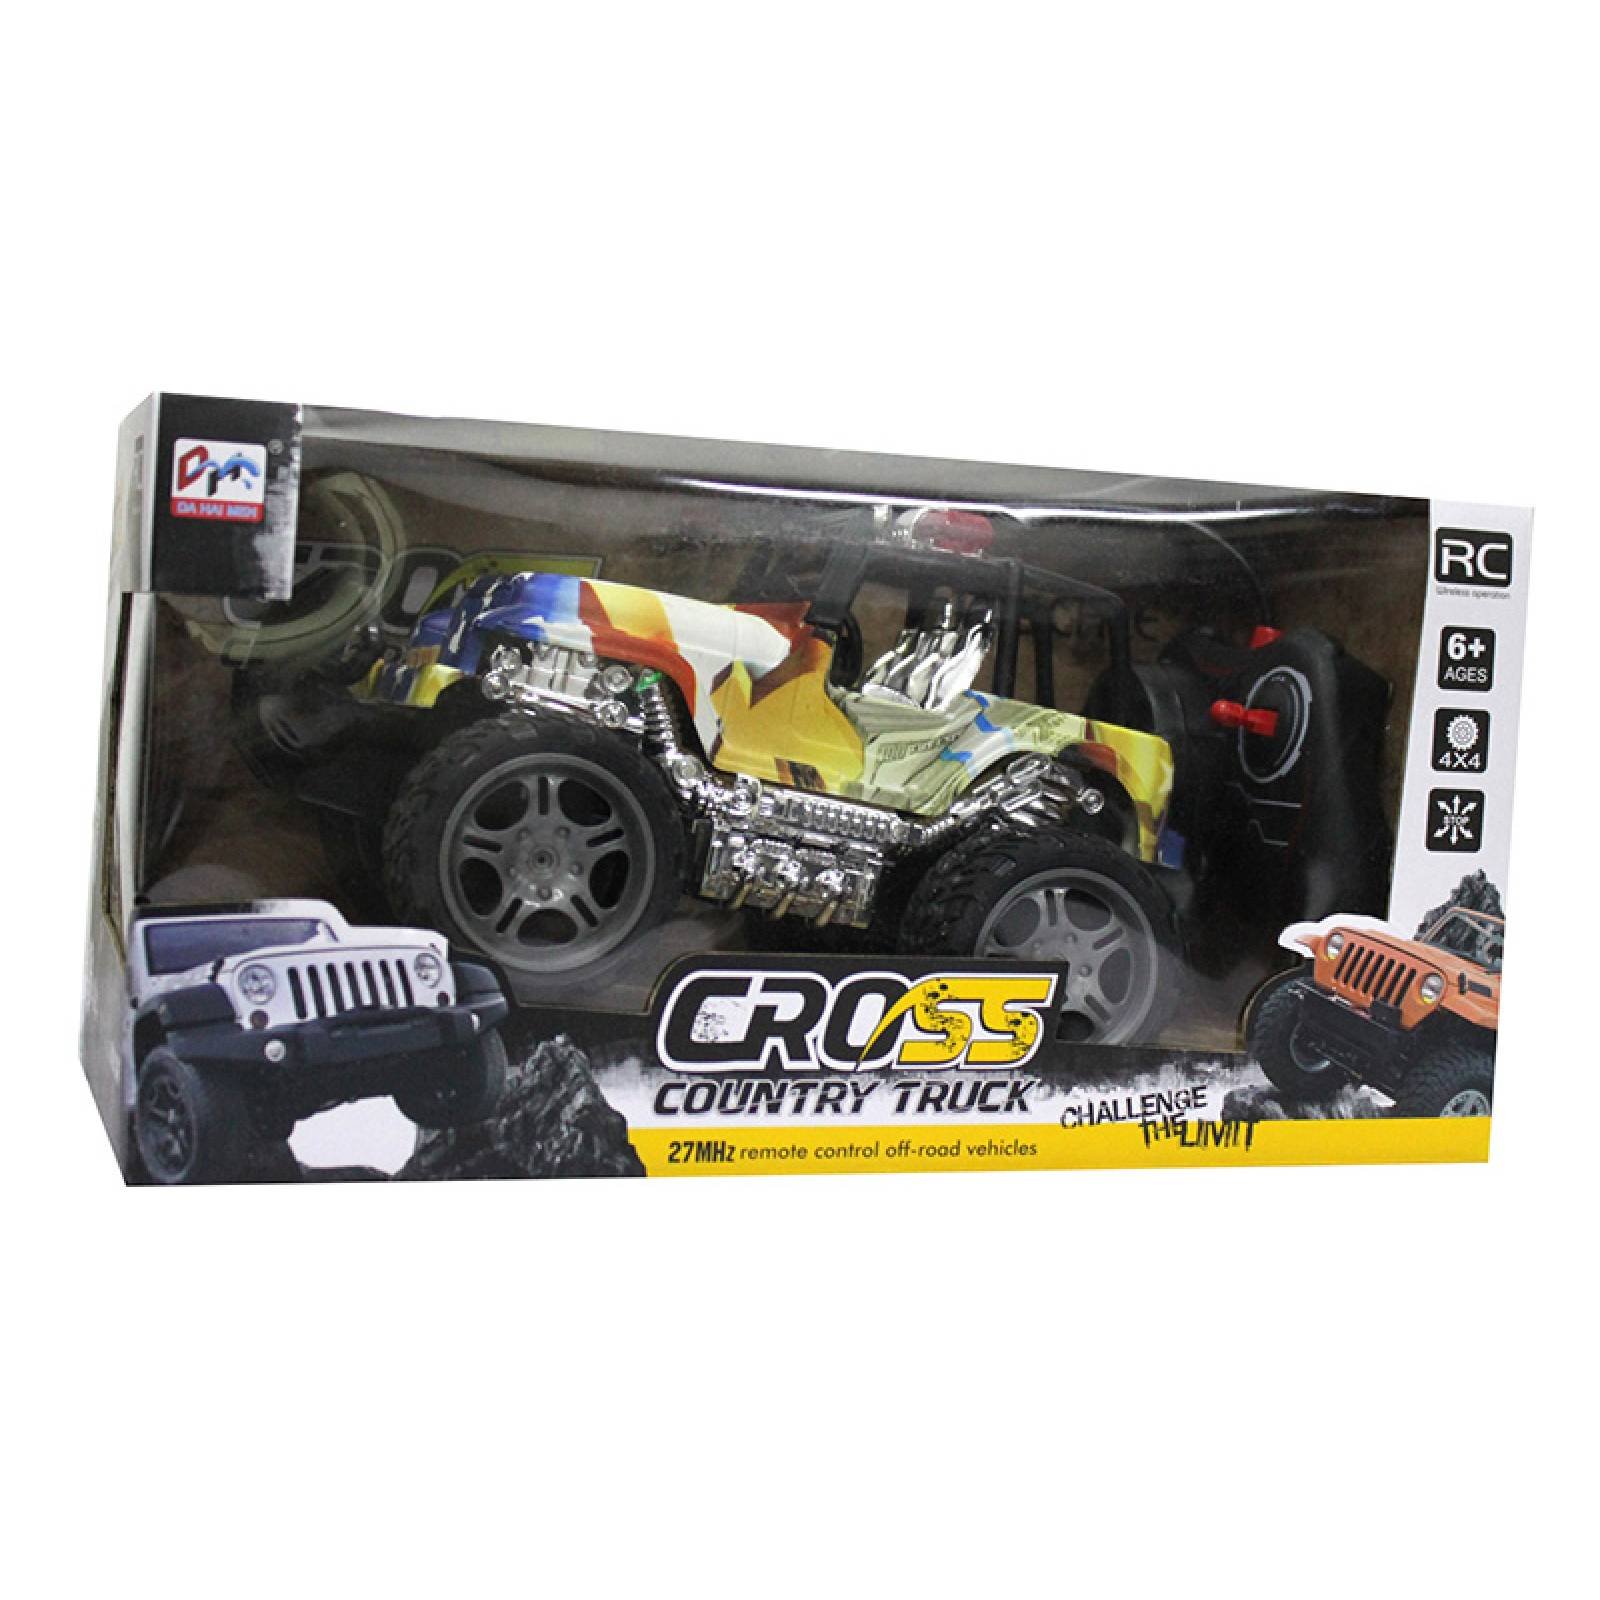 Cross Country Truck Control Remoto Color Negro